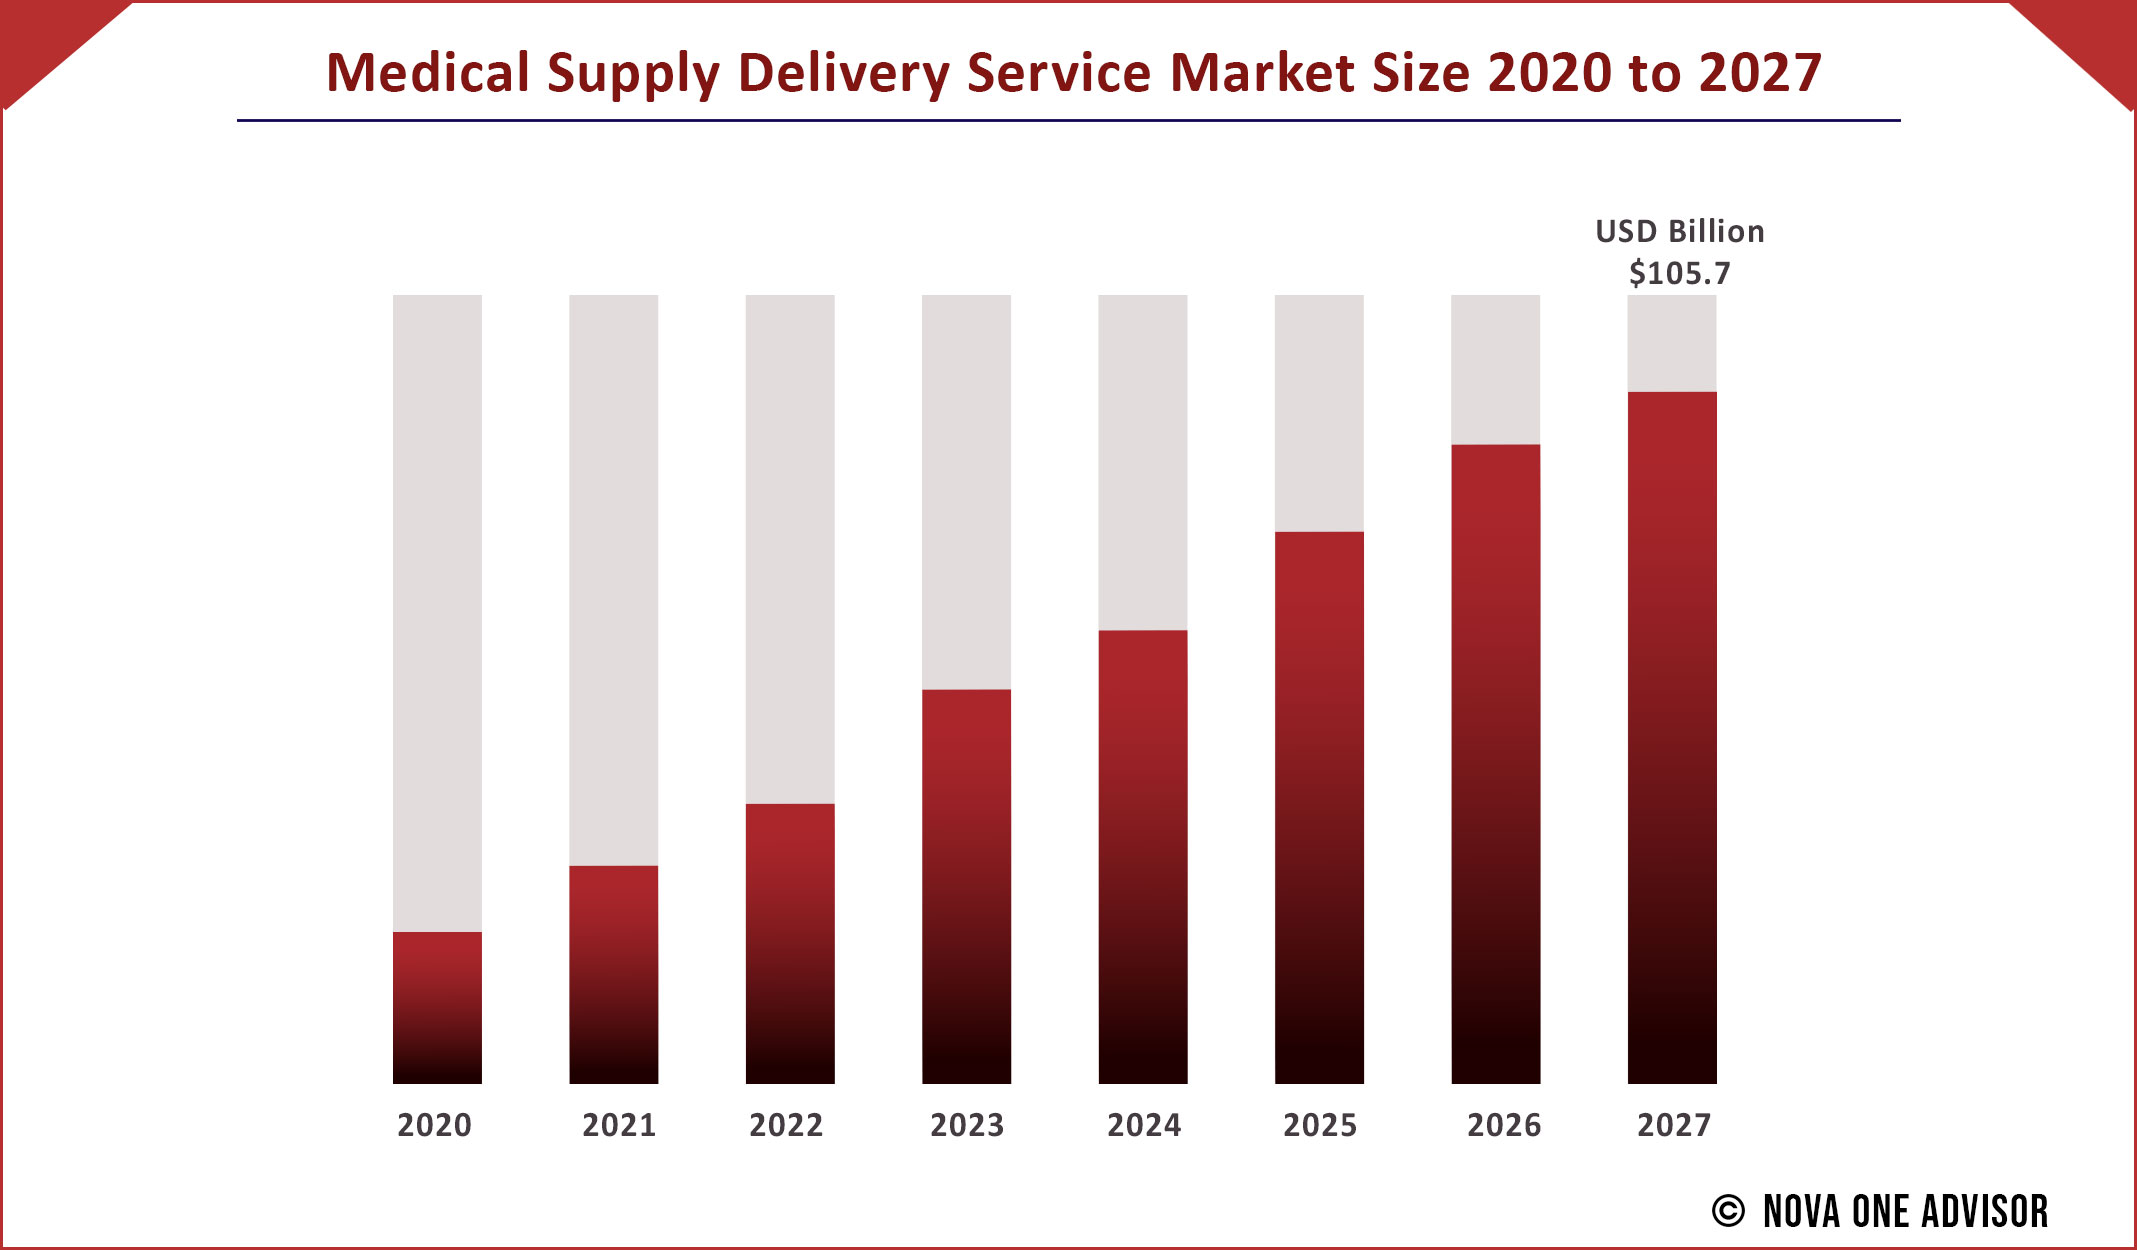 Medical Supply Delivery Service Market Size 2020 to 2027